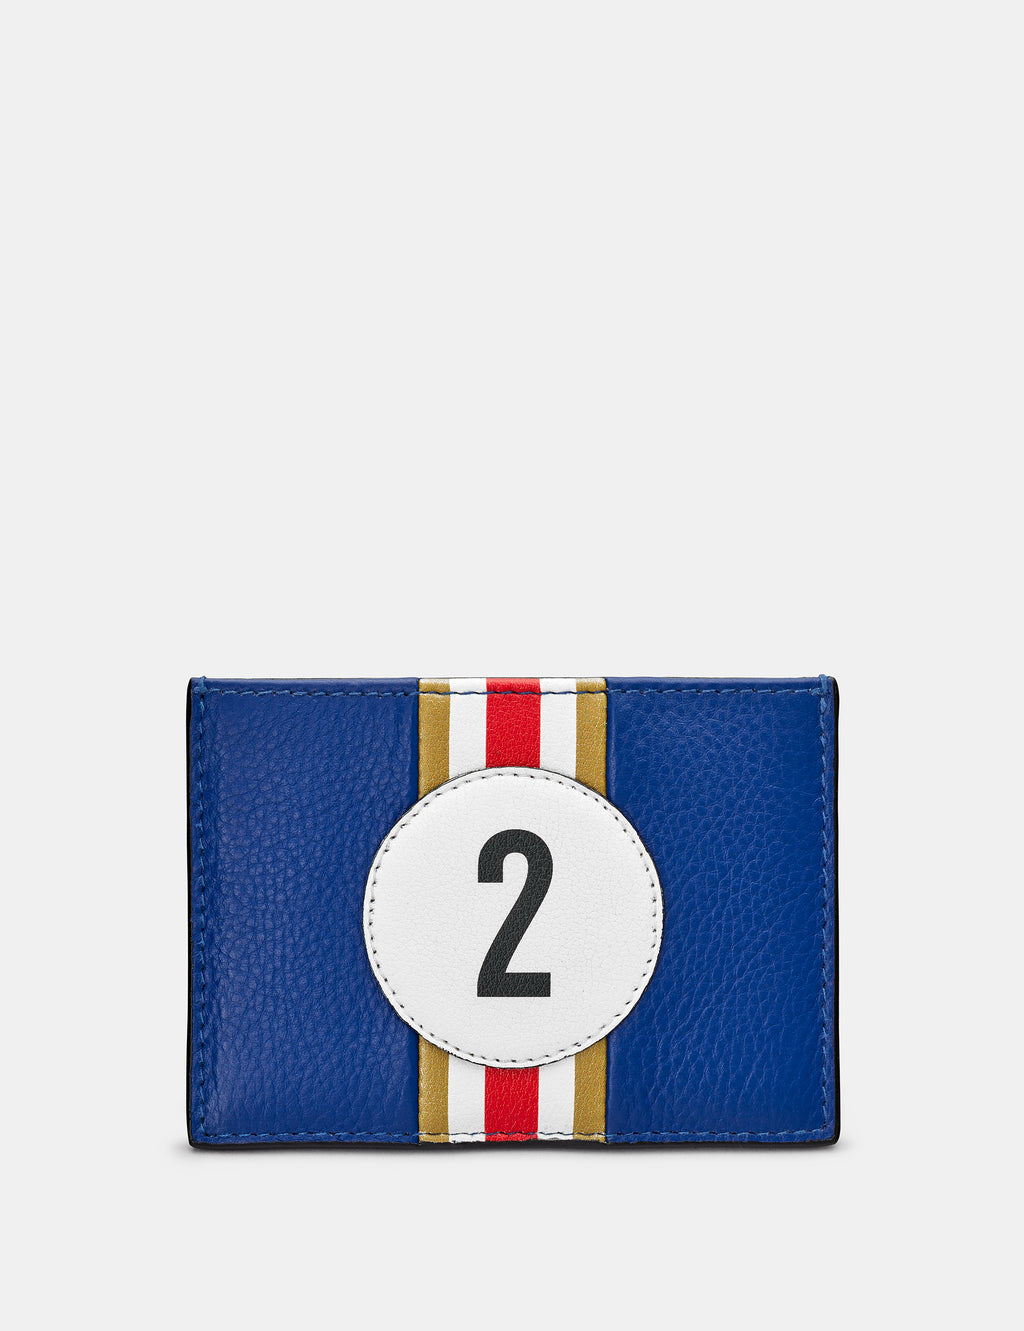 Car Livery No. 2 Blue and Black Leather Card Holder